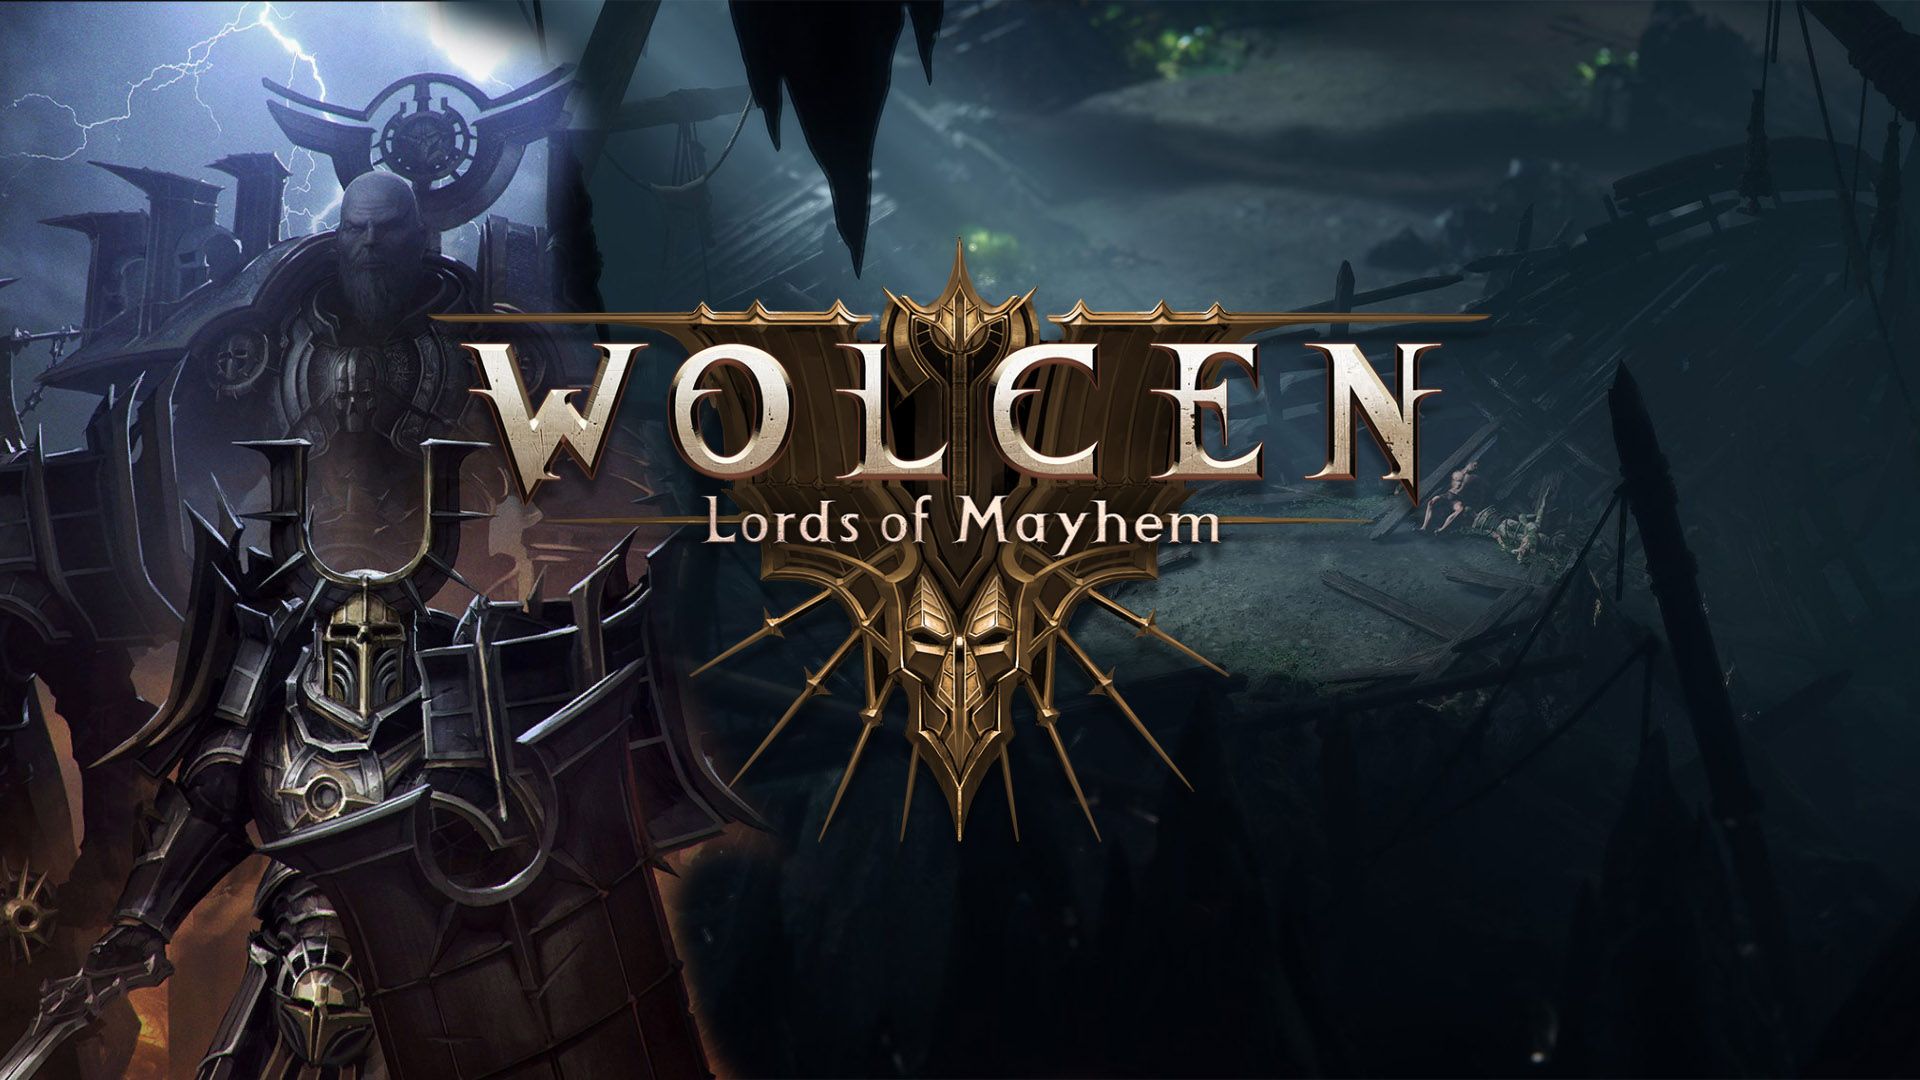 download the last version for iphoneWolcen: Lords of Mayhem